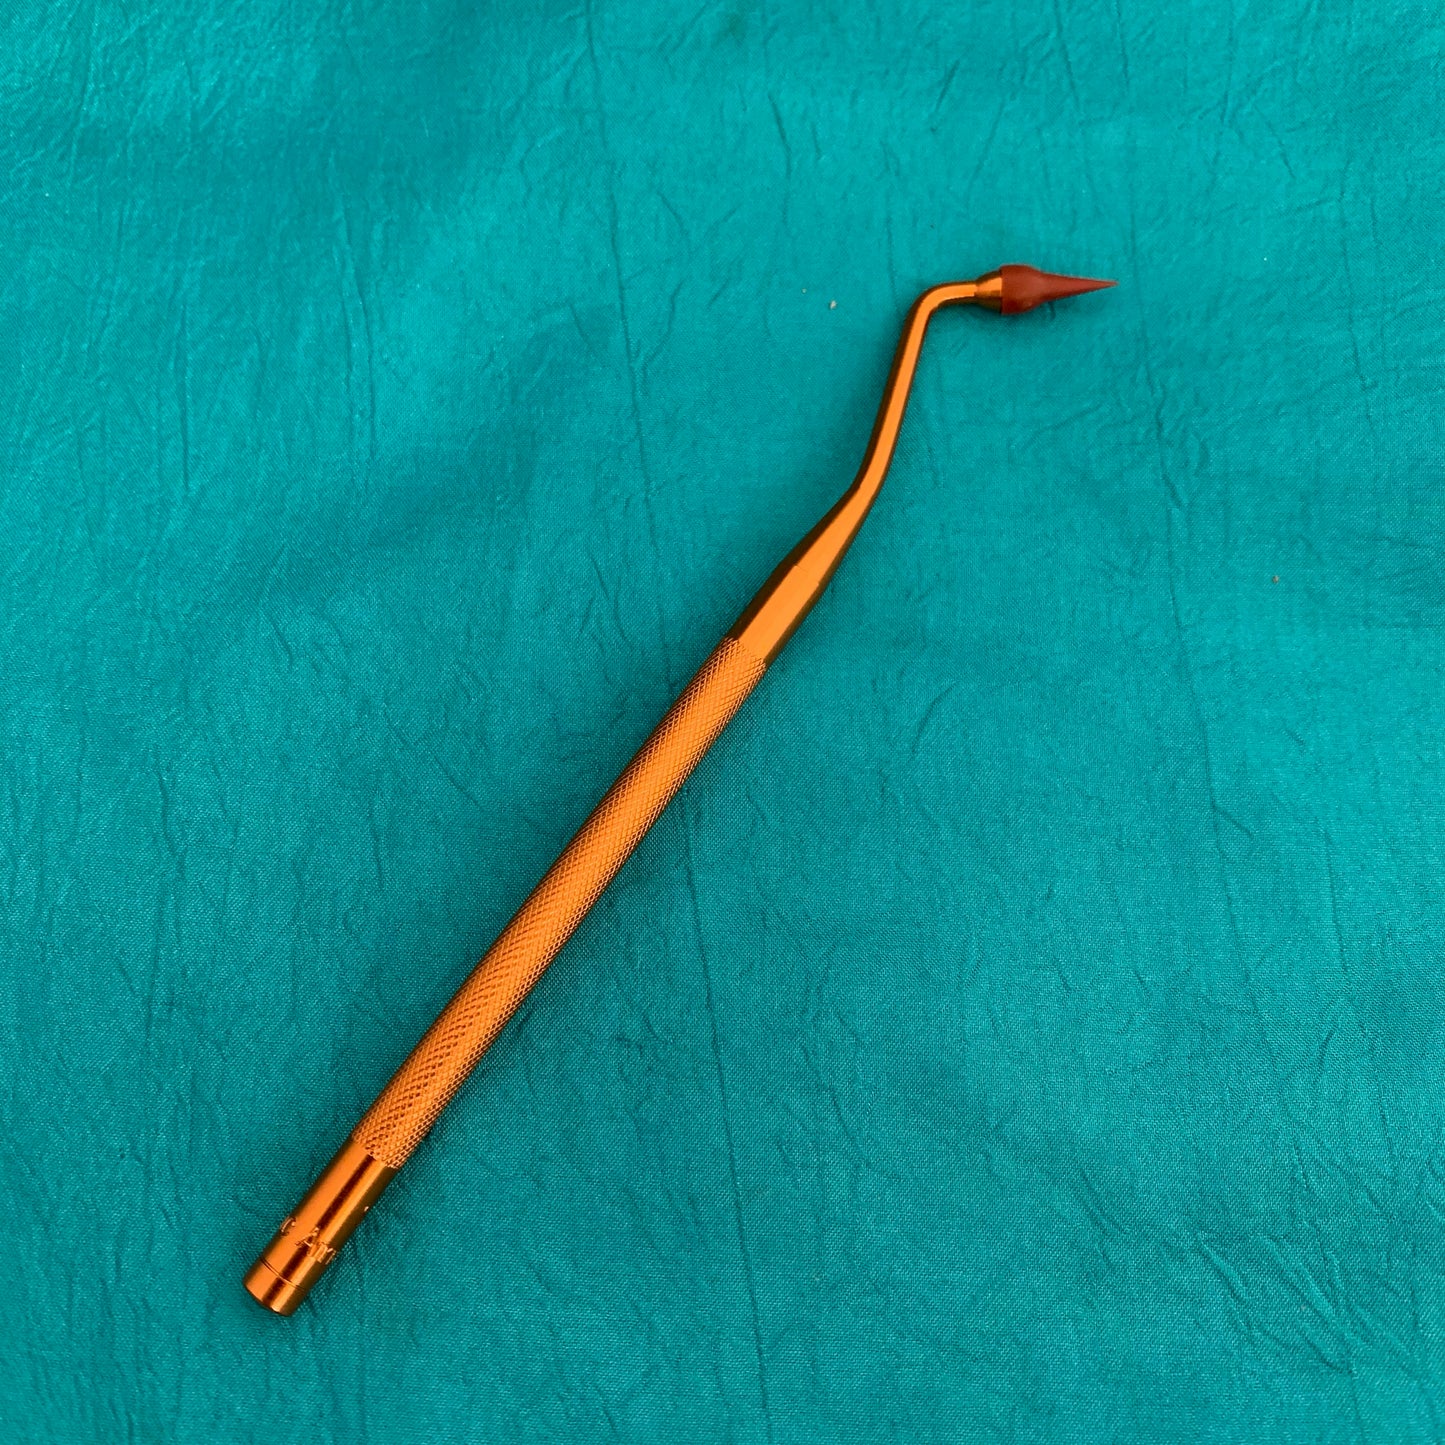 Rubber Tipped Sculpting Tool for polymer clay